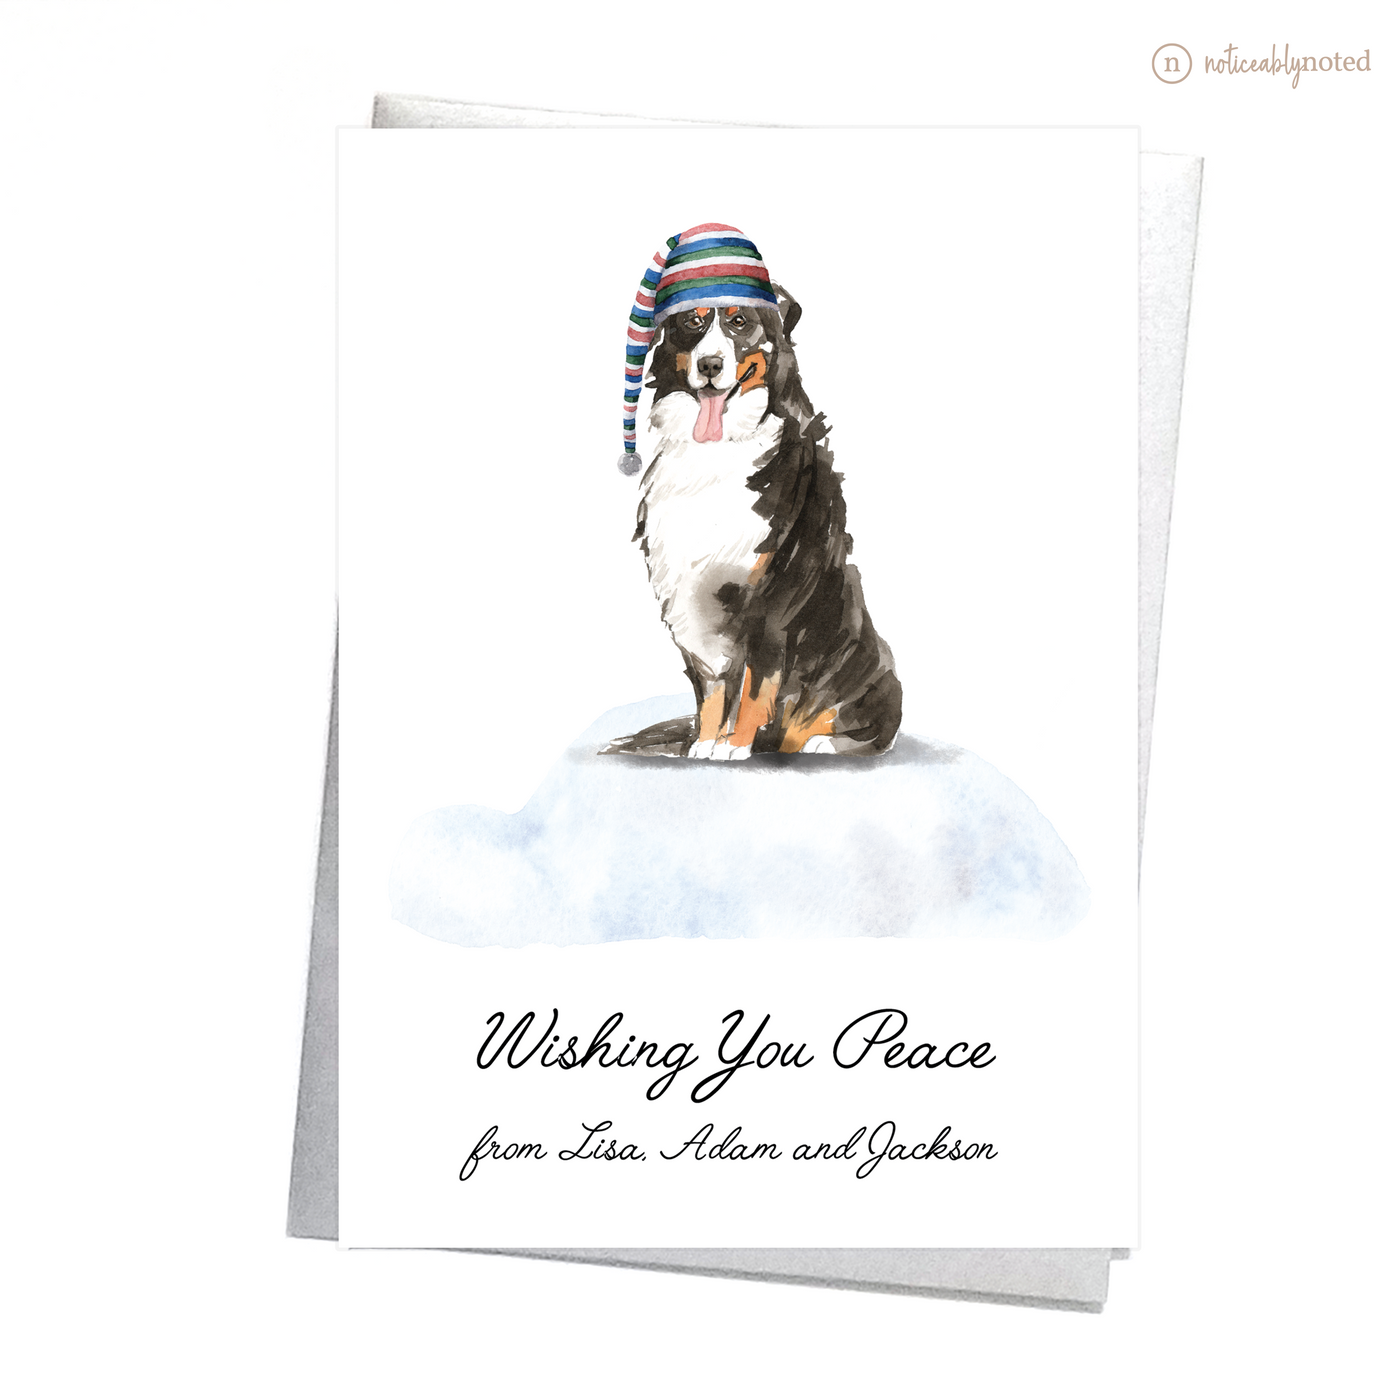 Bernese Mountain Dog Christmas Card | Noticeably Noted